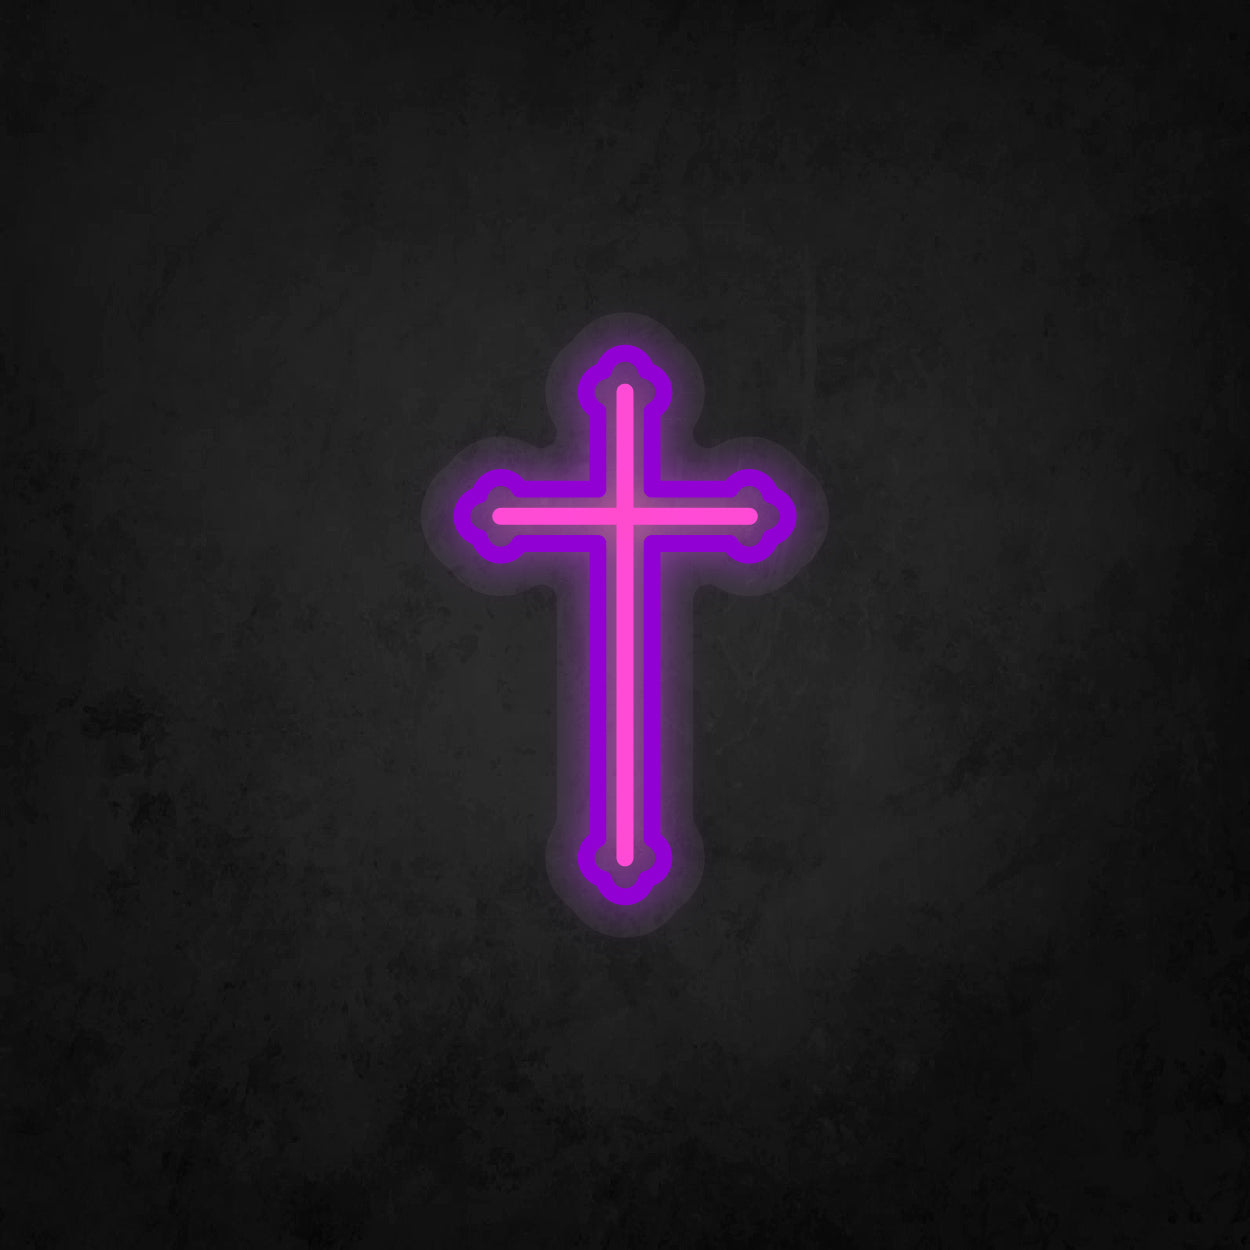 LED Neon Sign - The Cross Small 3 Line